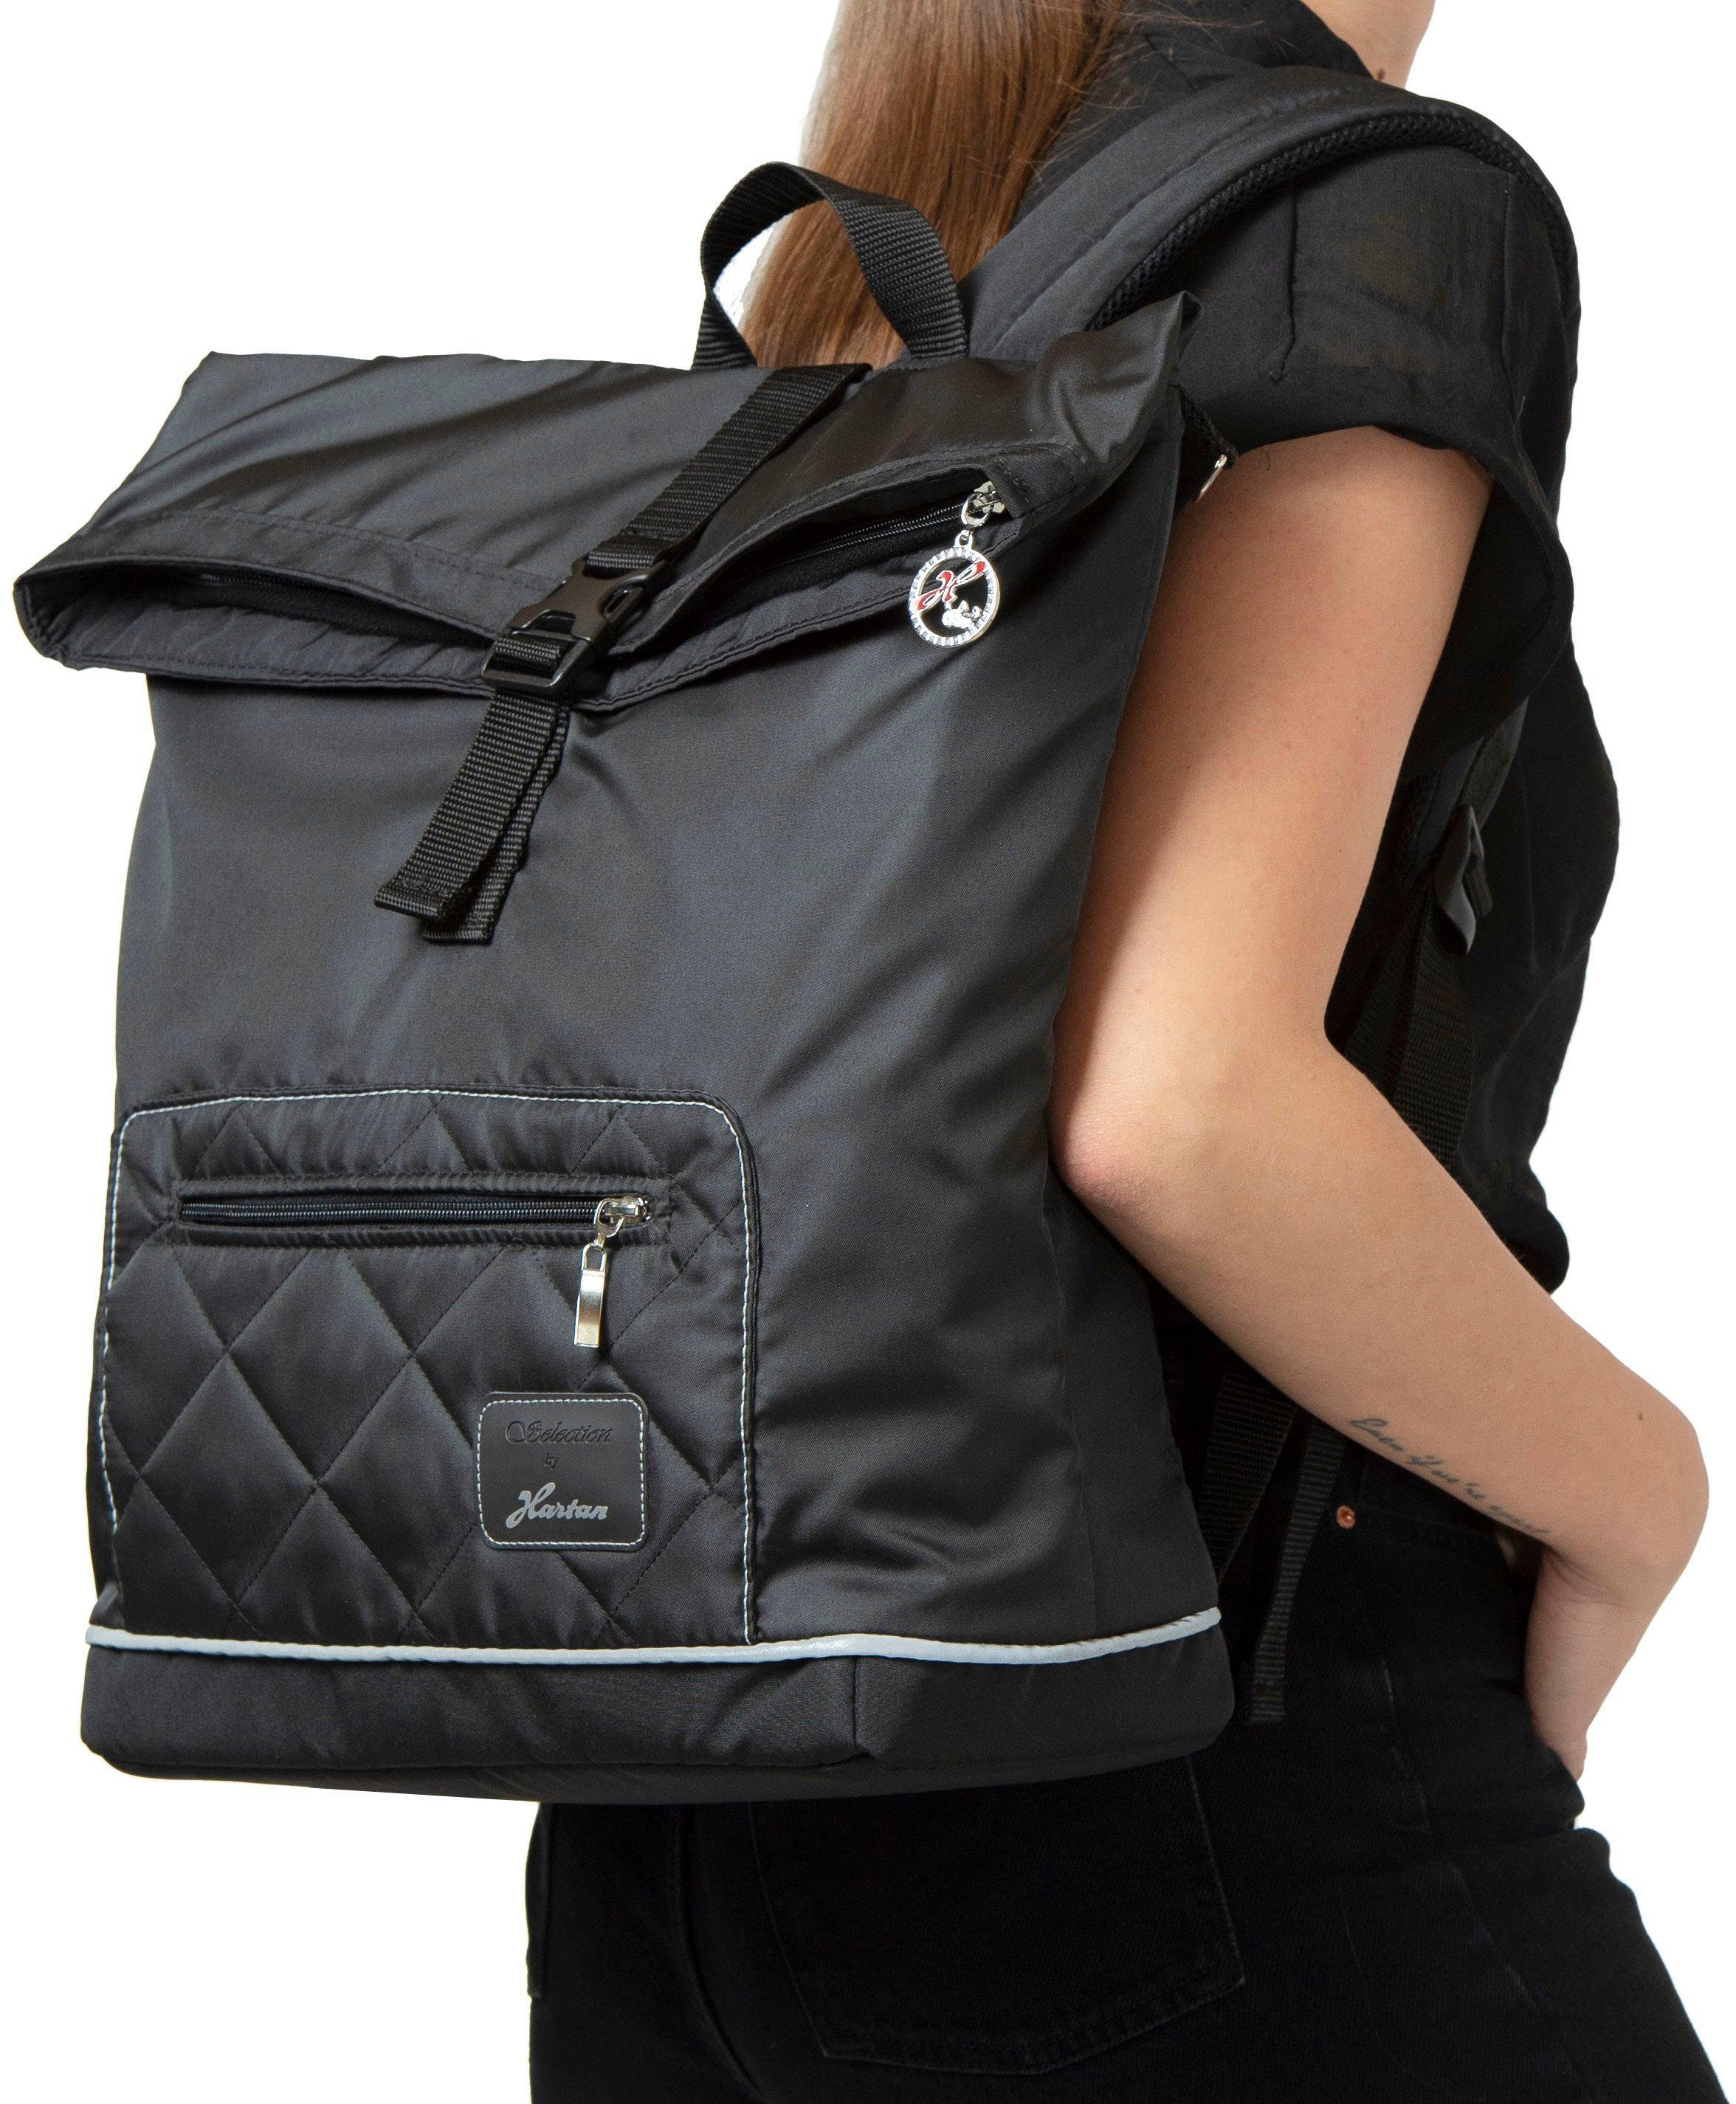 mit Made love - Thermofach; hedgehog in bag Germany Wickelrucksack Hartan Space Casual Collection,